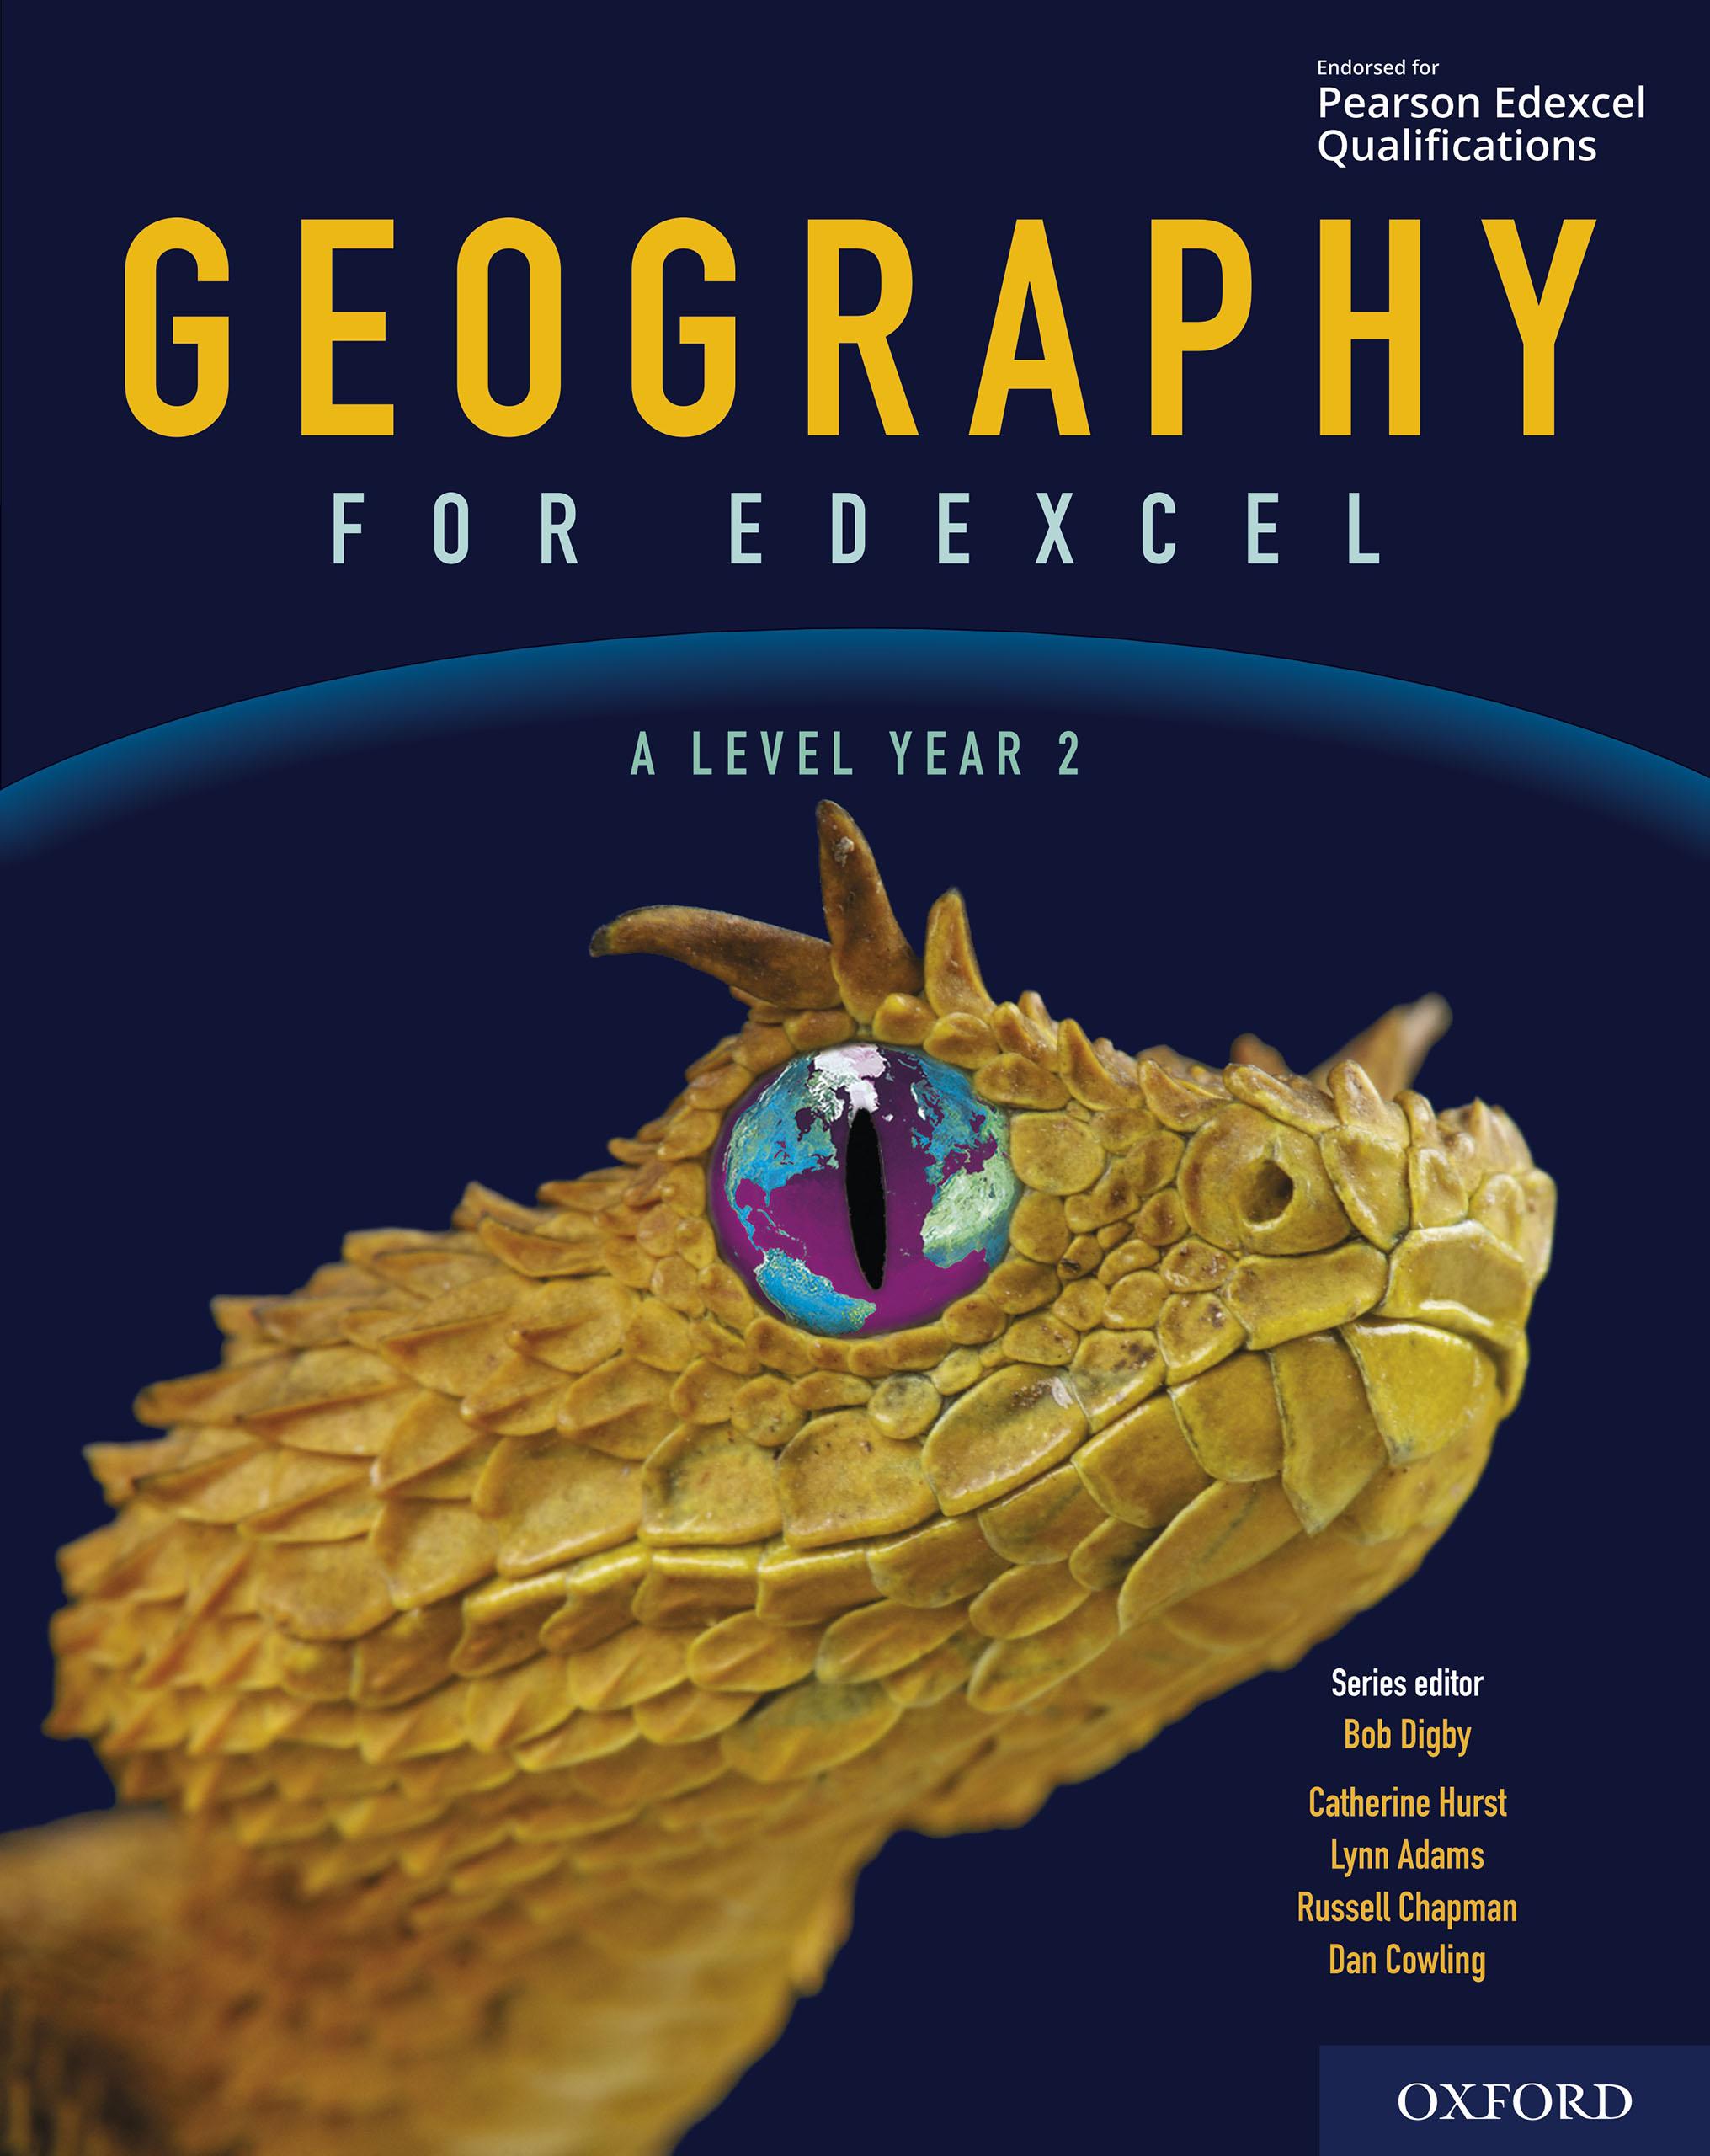 Geography (for Edexcel) - A level, year 2